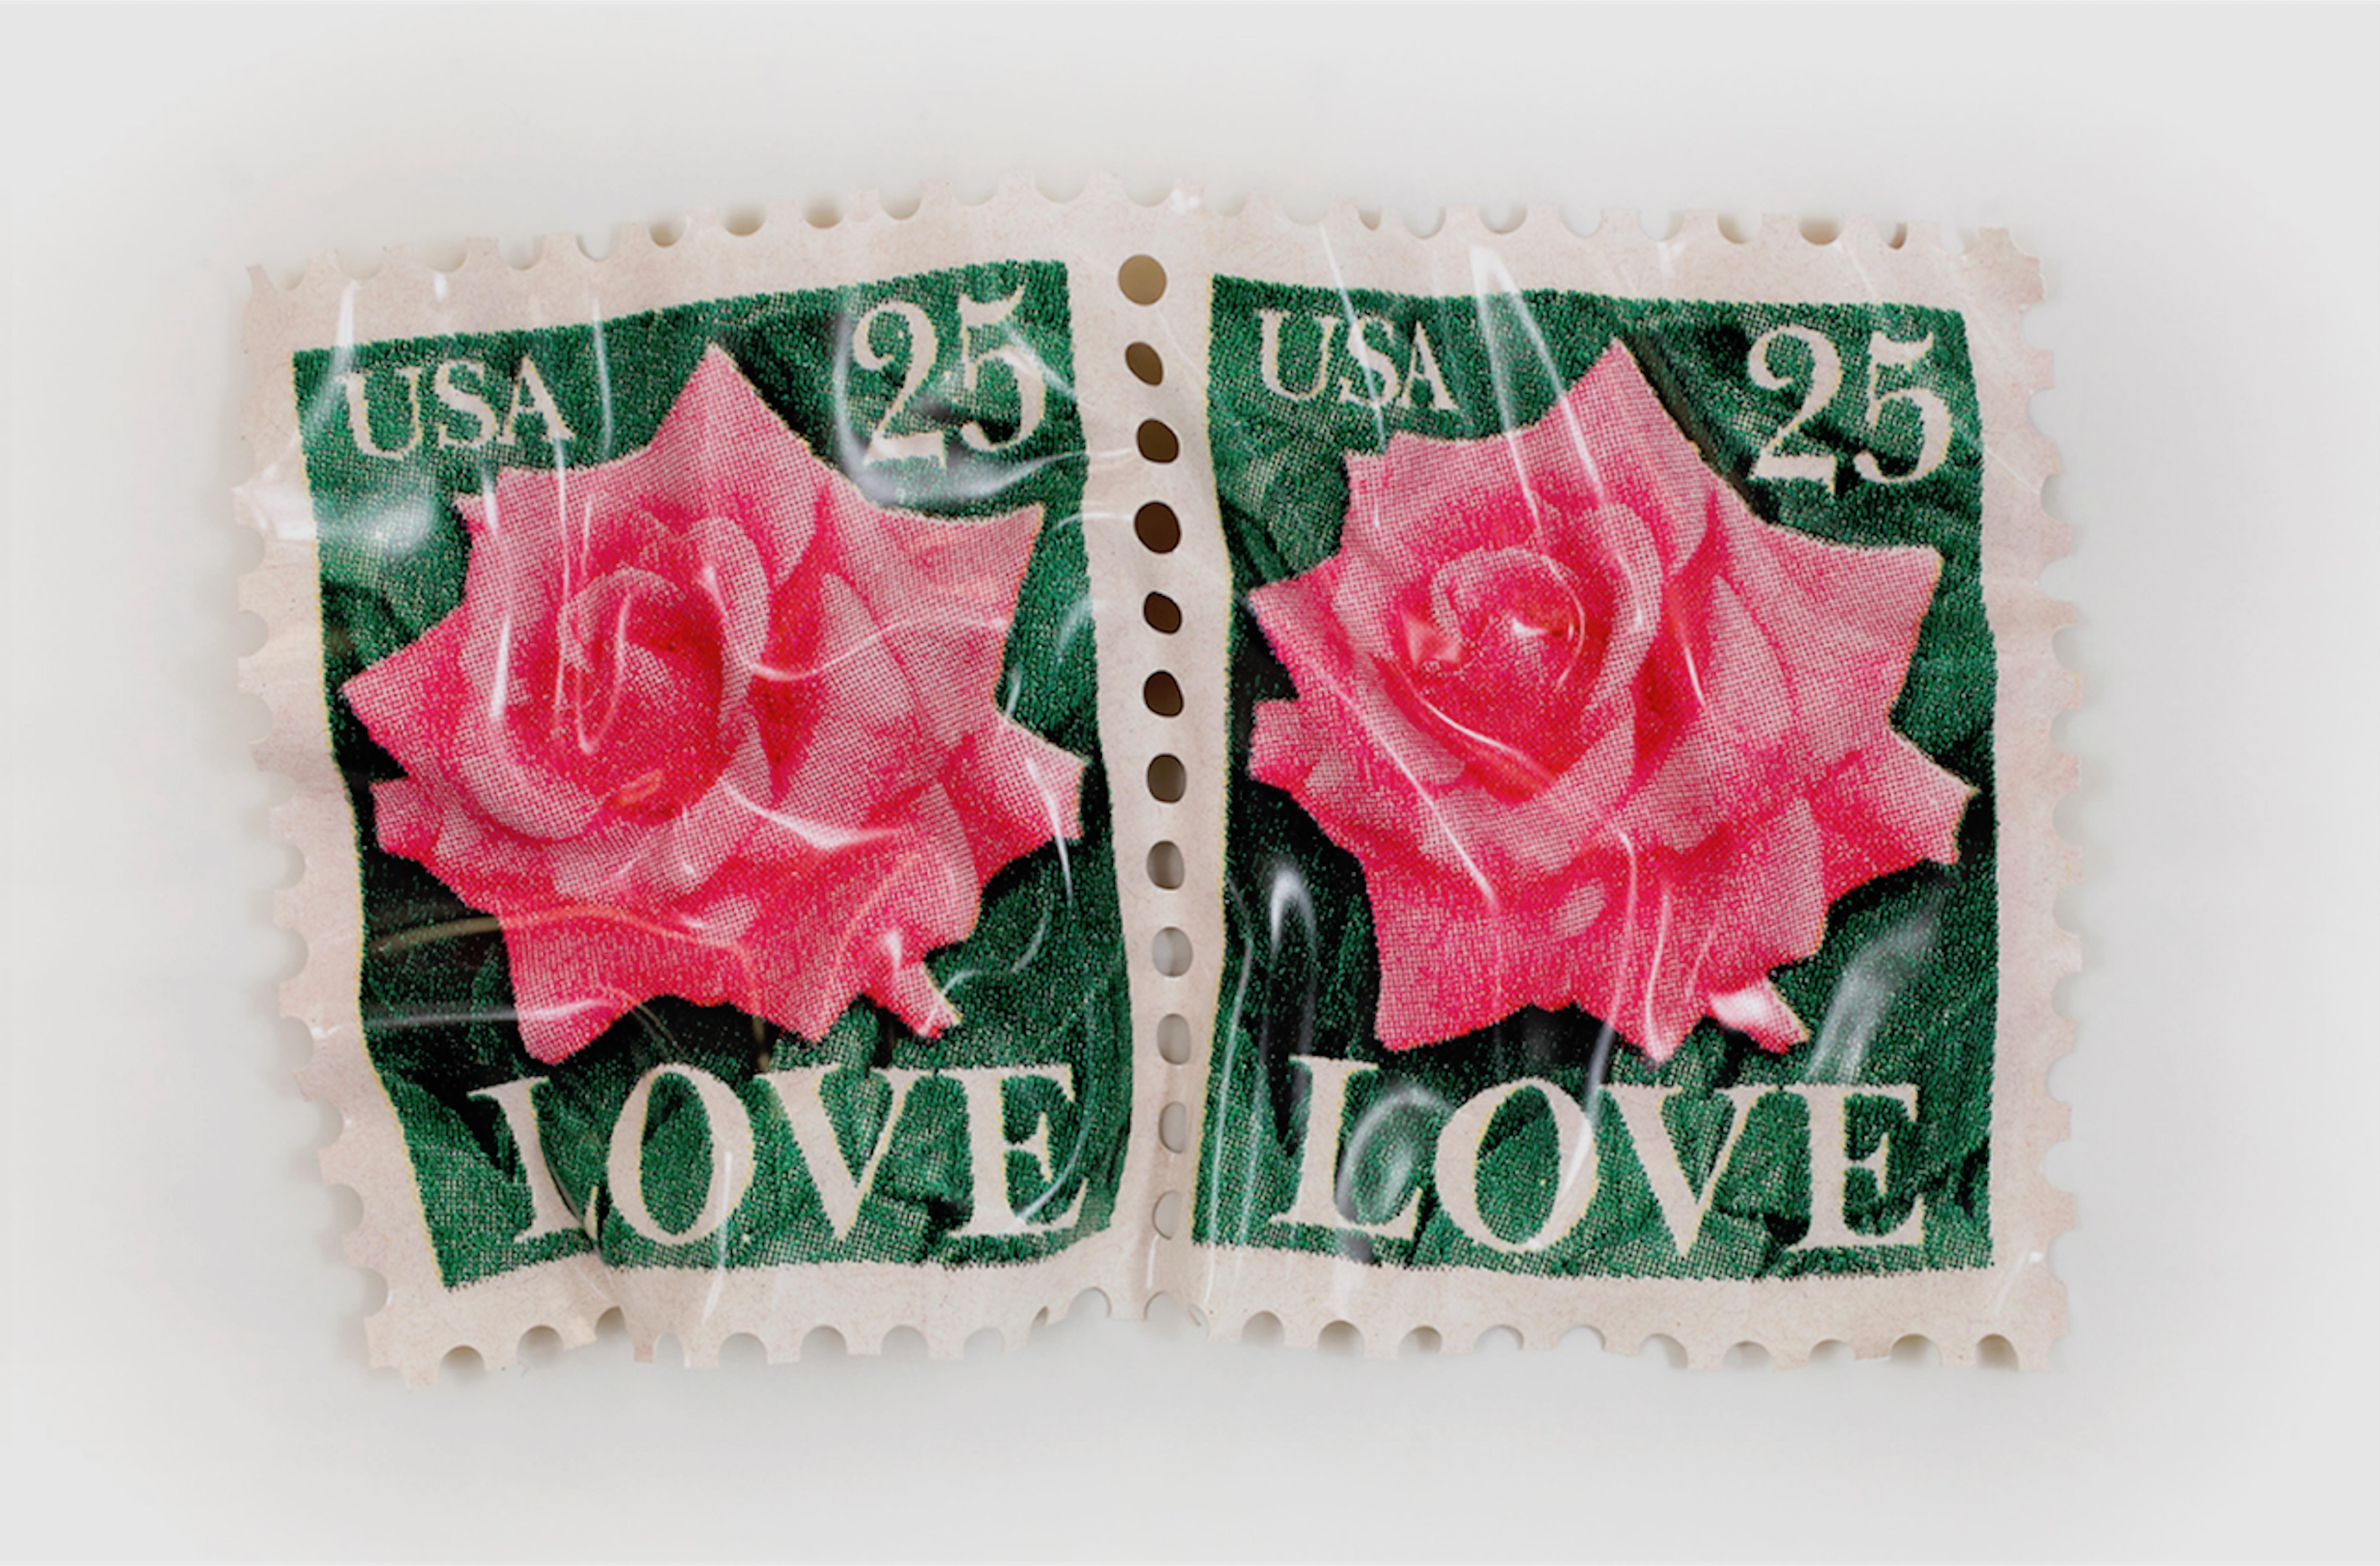 Paul Rousso Figurative Sculpture - Two Rose Love Stamps